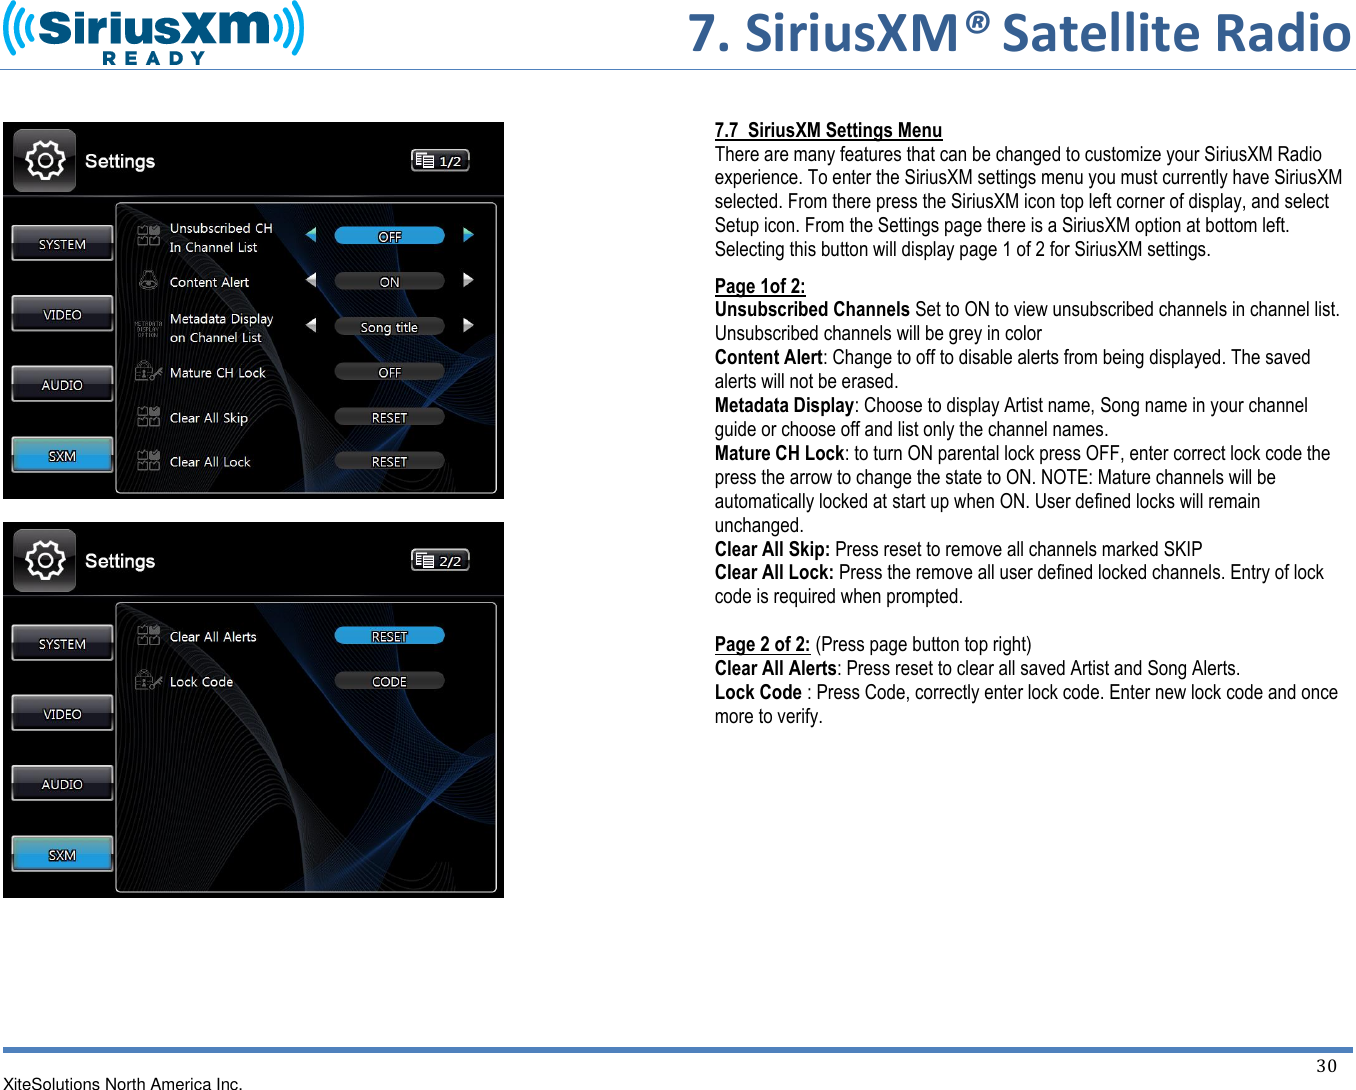     7. SiriusXM® Satellite Radio   XiteSolutions North America Inc.  30            7.7  SiriusXM Settings Menu There are many features that can be changed to customize your SiriusXM Radio experience. To enter the SiriusXM settings menu you must currently have SiriusXM selected. From there press the SiriusXM icon top left corner of display, and select Setup icon. From the Settings page there is a SiriusXM option at bottom left. Selecting this button will display page 1 of 2 for SiriusXM settings. Page 1of 2: Unsubscribed Channels Set to ON to view unsubscribed channels in channel list. Unsubscribed channels will be grey in color Content Alert: Change to off to disable alerts from being displayed. The saved alerts will not be erased. Metadata Display: Choose to display Artist name, Song name in your channel guide or choose off and list only the channel names. Mature CH Lock: to turn ON parental lock press OFF, enter correct lock code the press the arrow to change the state to ON. NOTE: Mature channels will be automatically locked at start up when ON. User defined locks will remain unchanged. Clear All Skip: Press reset to remove all channels marked SKIP Clear All Lock: Press the remove all user defined locked channels. Entry of lock code is required when prompted.  Page 2 of 2: (Press page button top right) Clear All Alerts: Press reset to clear all saved Artist and Song Alerts. Lock Code : Press Code, correctly enter lock code. Enter new lock code and once more to verify.         